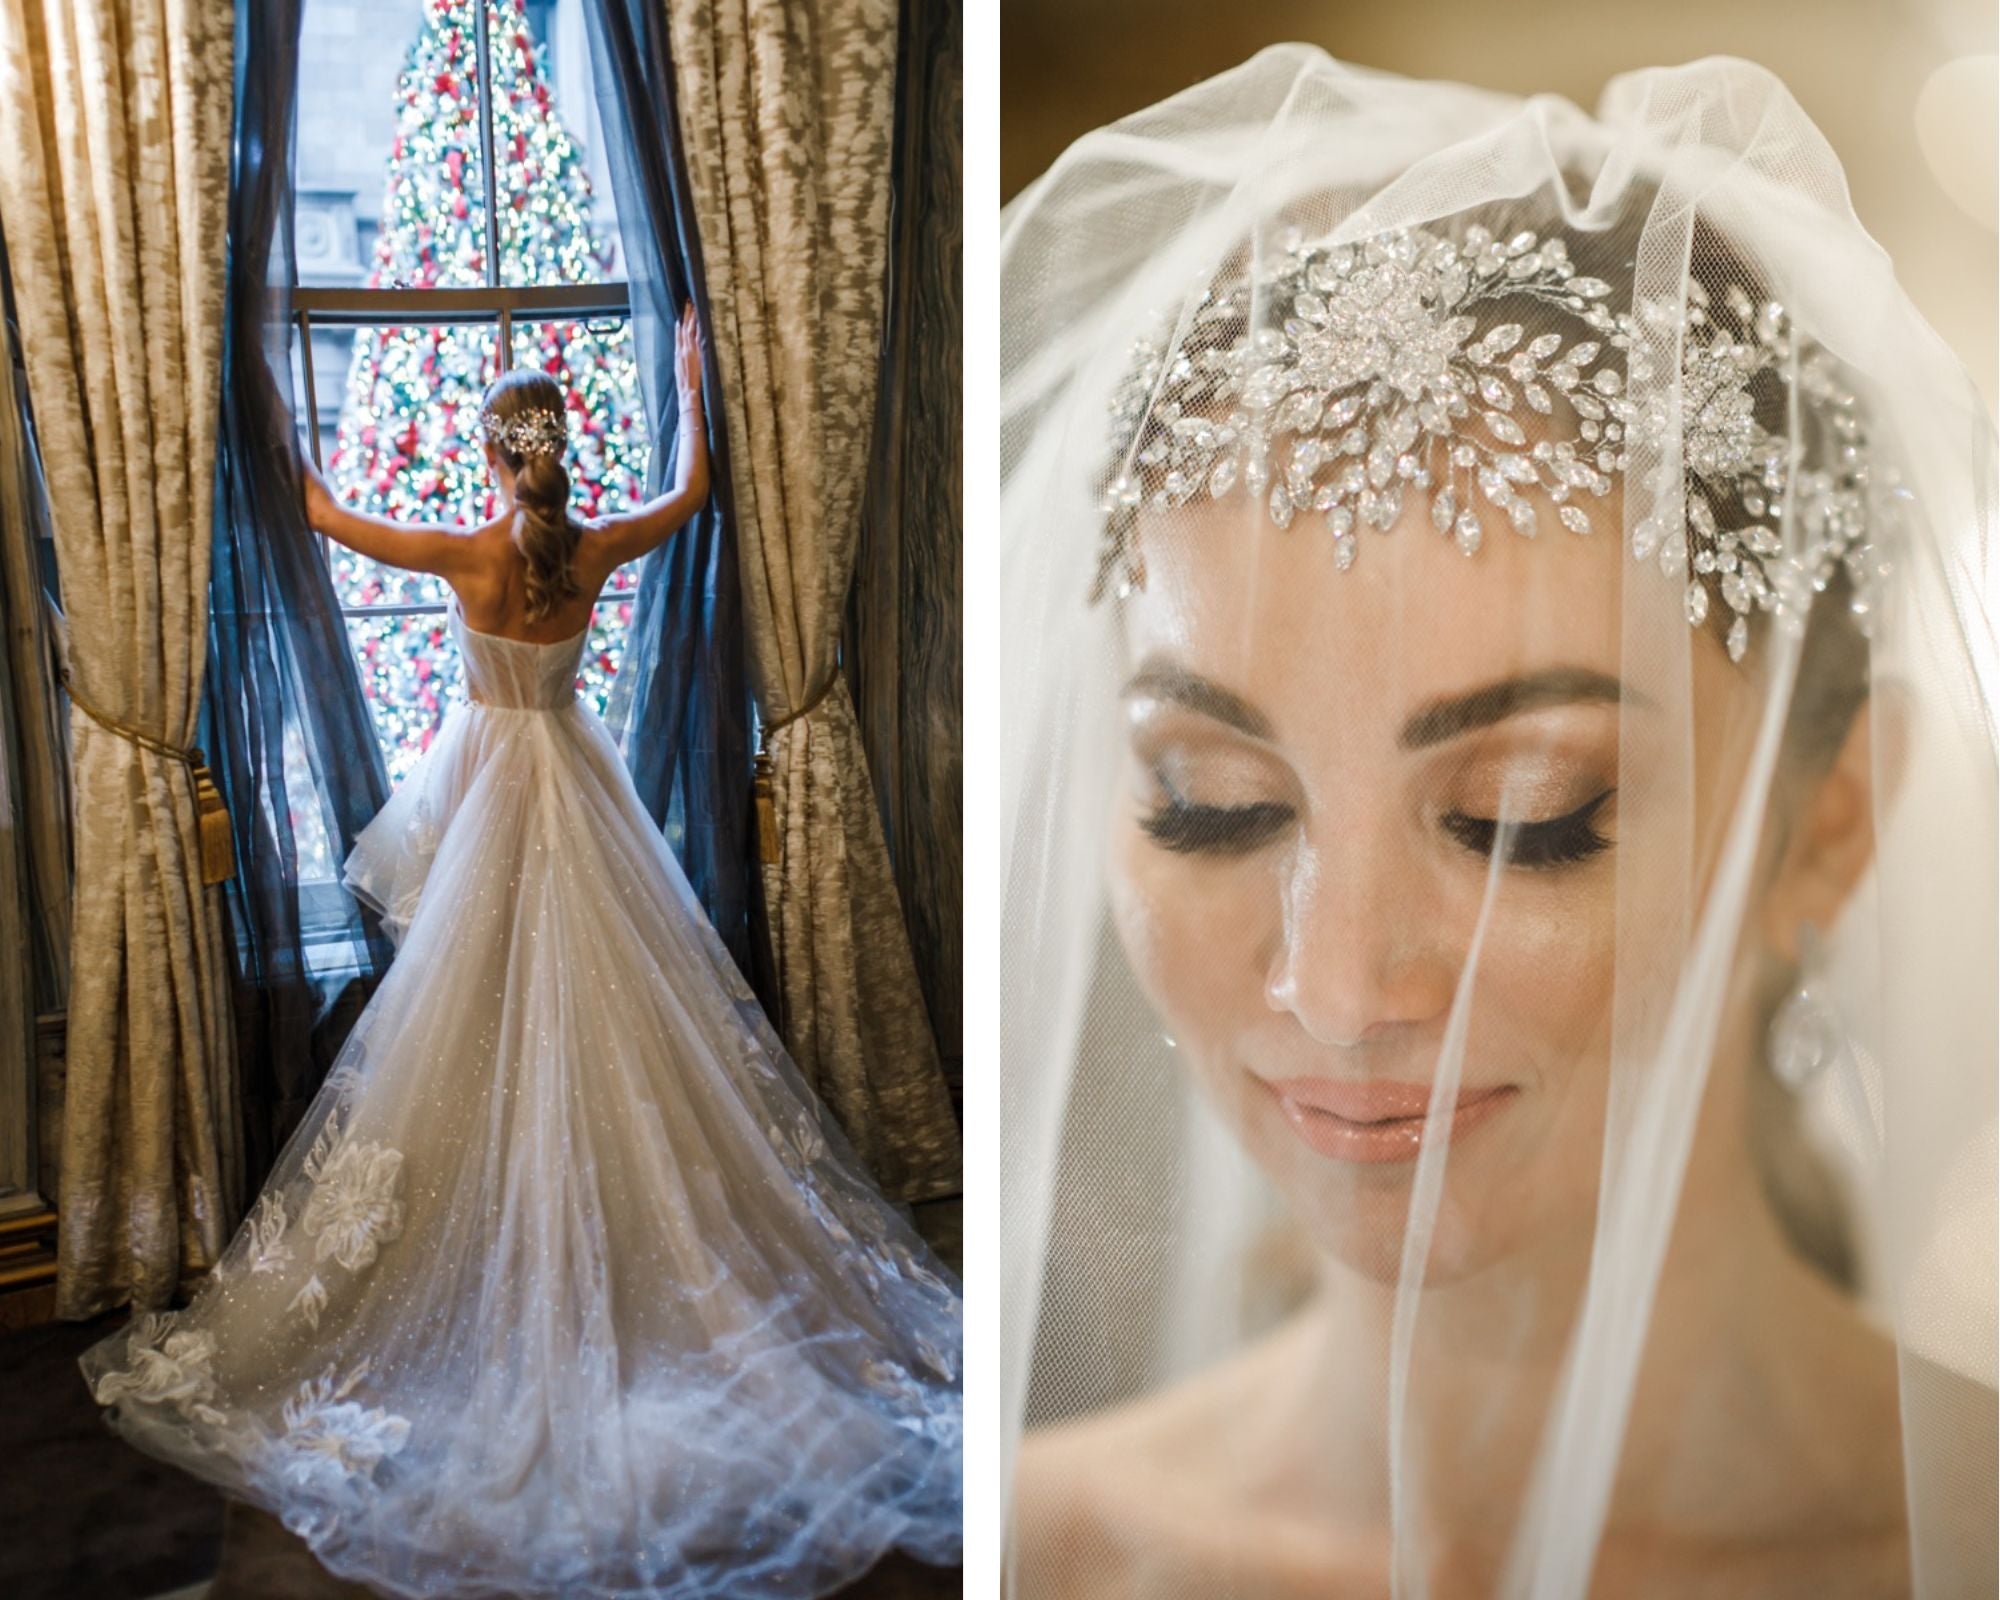 Marie Antoinette-inspired bridal style! This shoot features glam, lavish wedding, and bridal style ideas, like this regal bride wearing a fabulous wedding gown with a full, sheer train from Bridal Reflections NY and a Swarovski crystal bridal hair vine from Bridal Styles Boutique. Photography by Artvesta Studio. 